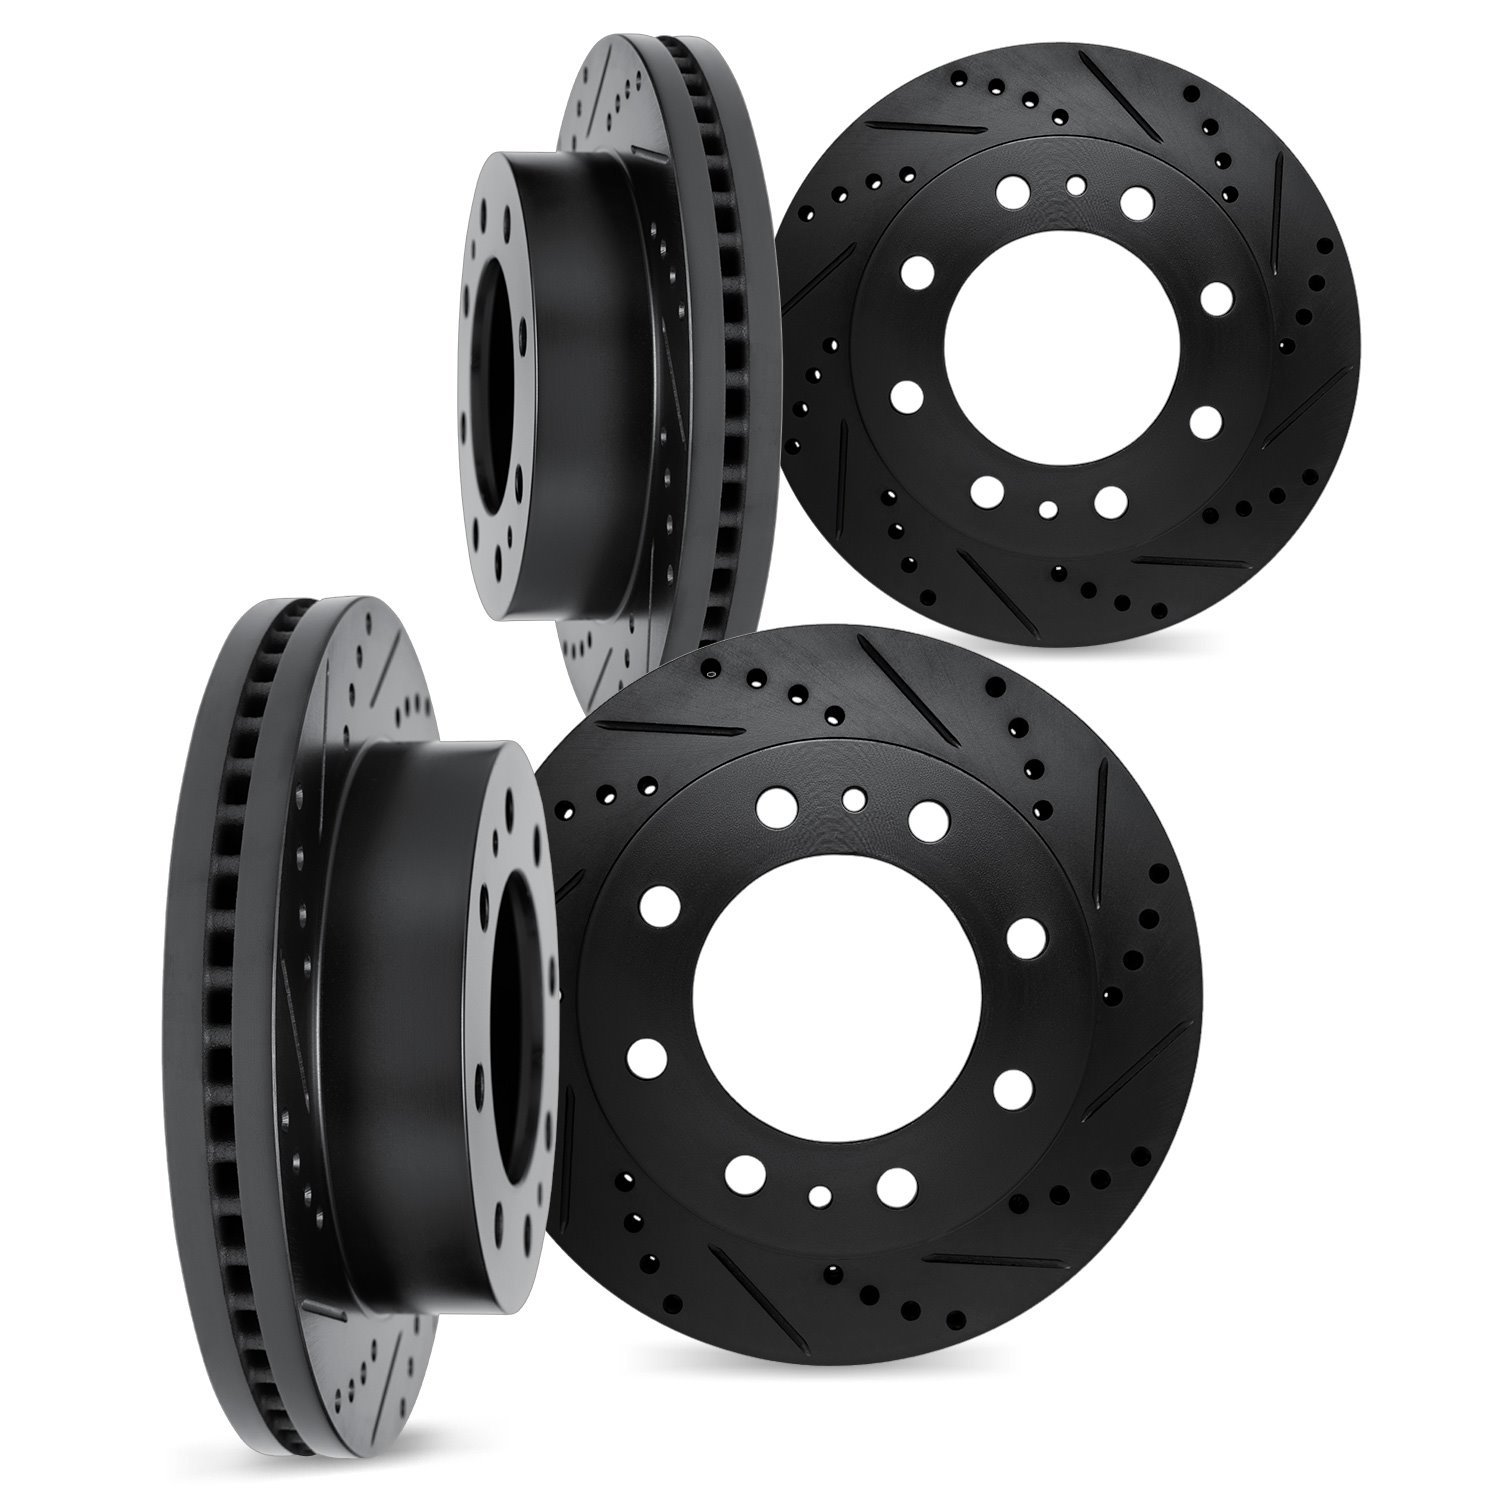 8004-54076 Drilled/Slotted Brake Rotors [Black], Fits Select Ford/Lincoln/Mercury/Mazda, Position: Front and Rear